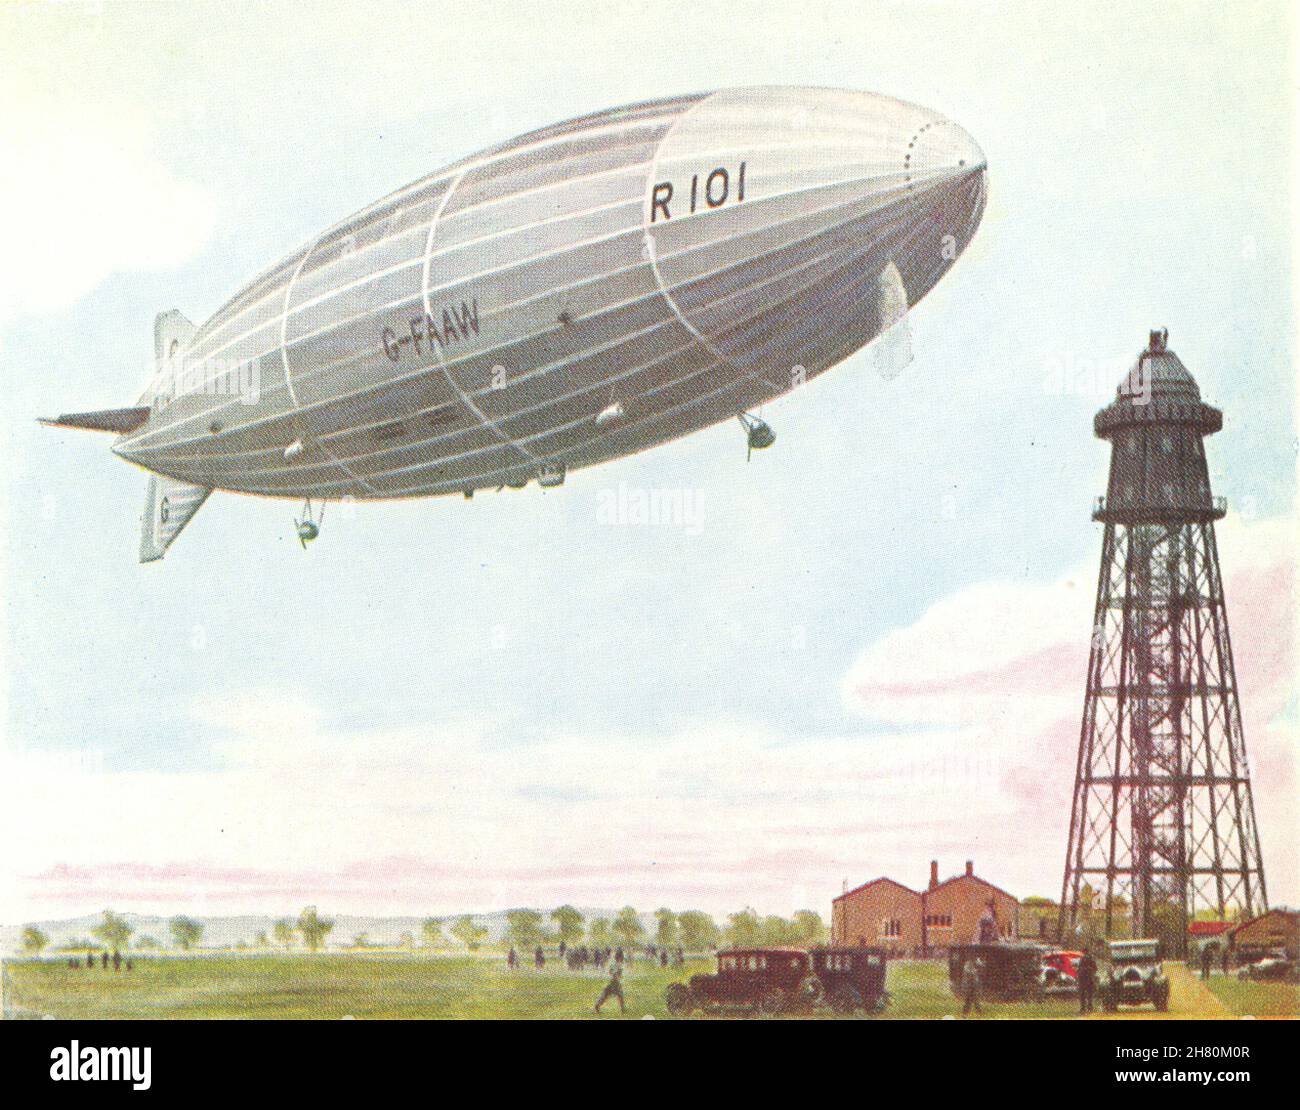 AIRCRAFT. R 101 discharging ballast as she leaves the mast 1930 old print Stock Photo